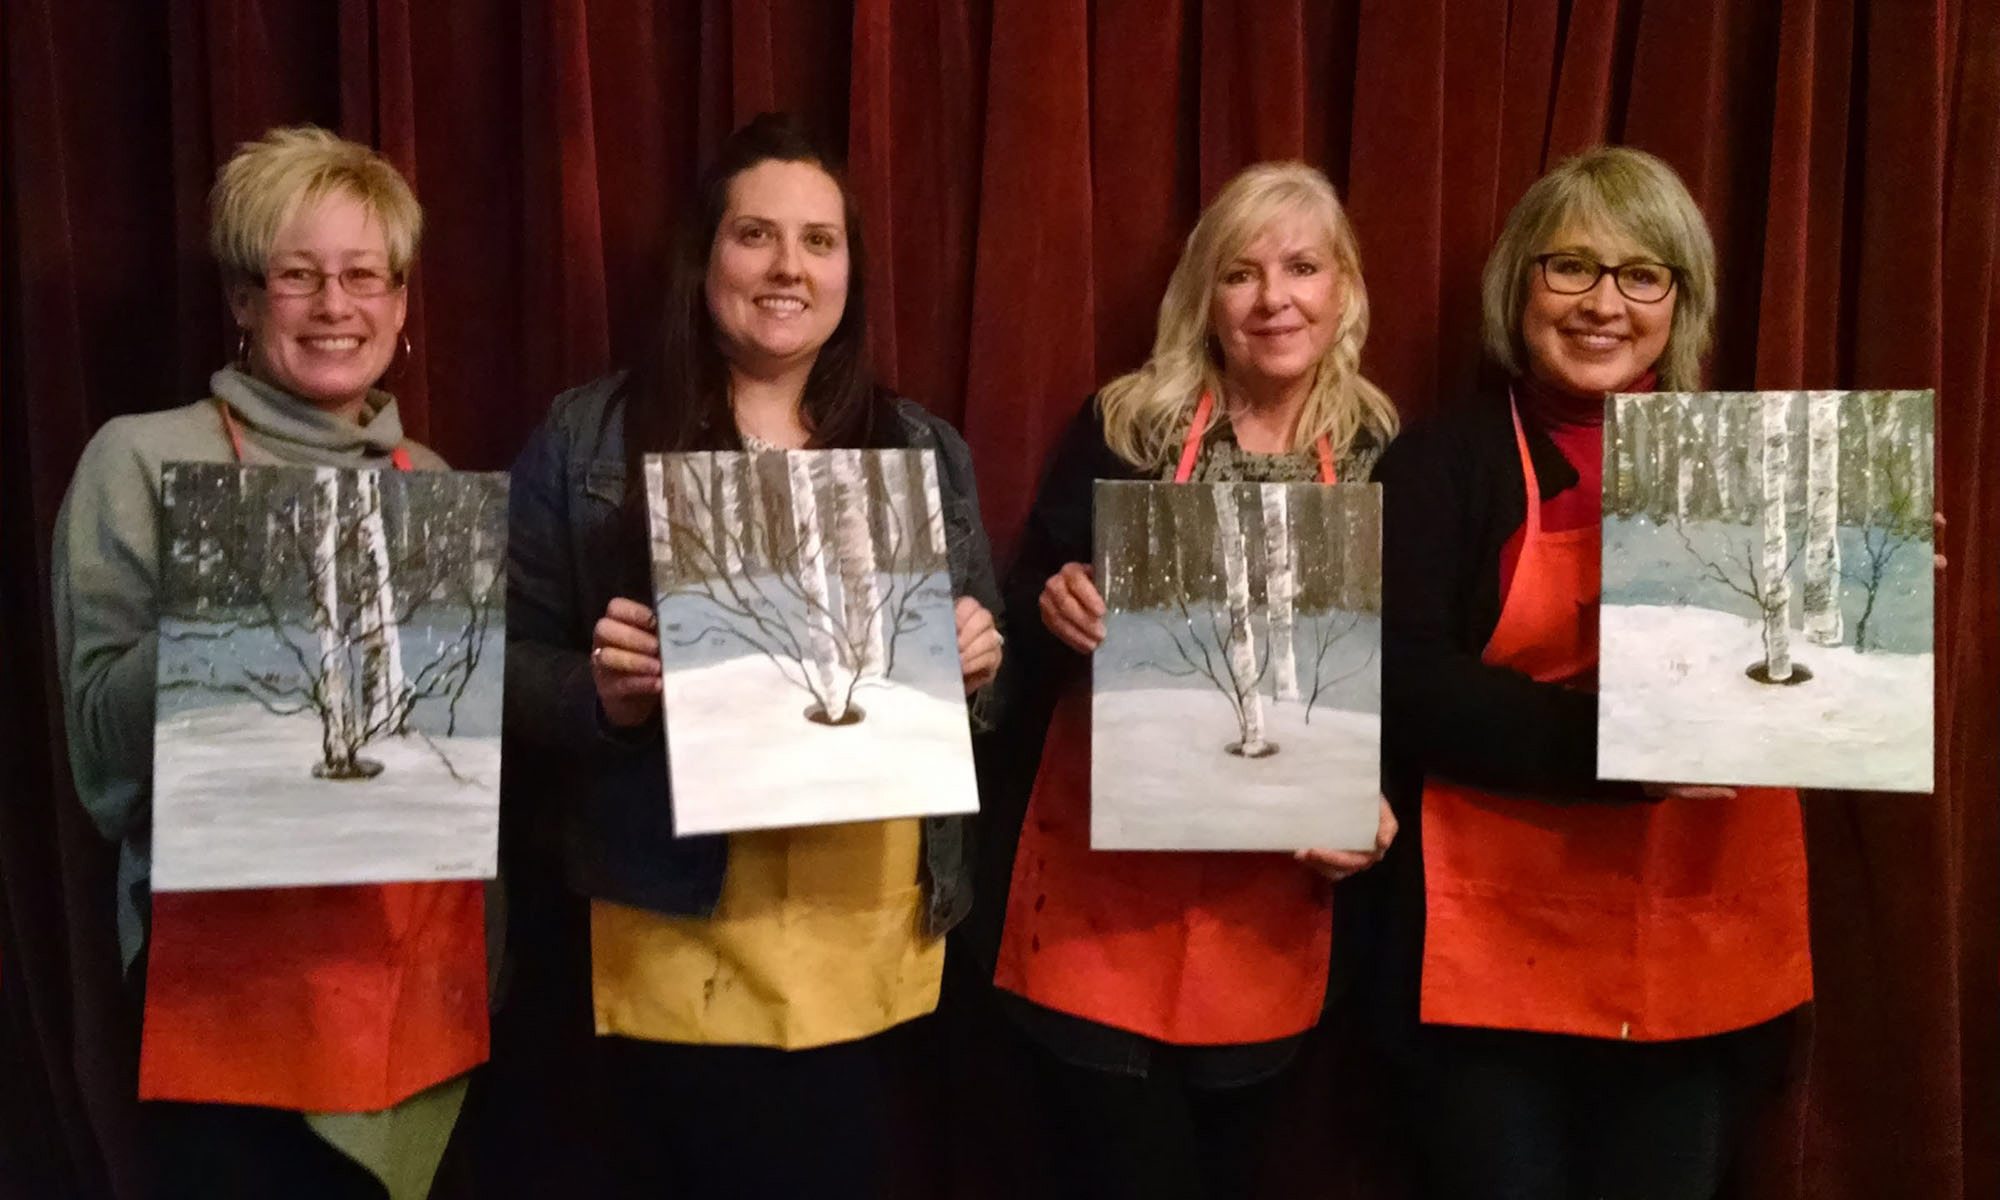 Classes of up to 20 people come away with as many variations of the same painting at Sharon’s Paint and Pour classes. Birch Trees in the Snow was the subject at Main Event East recently.